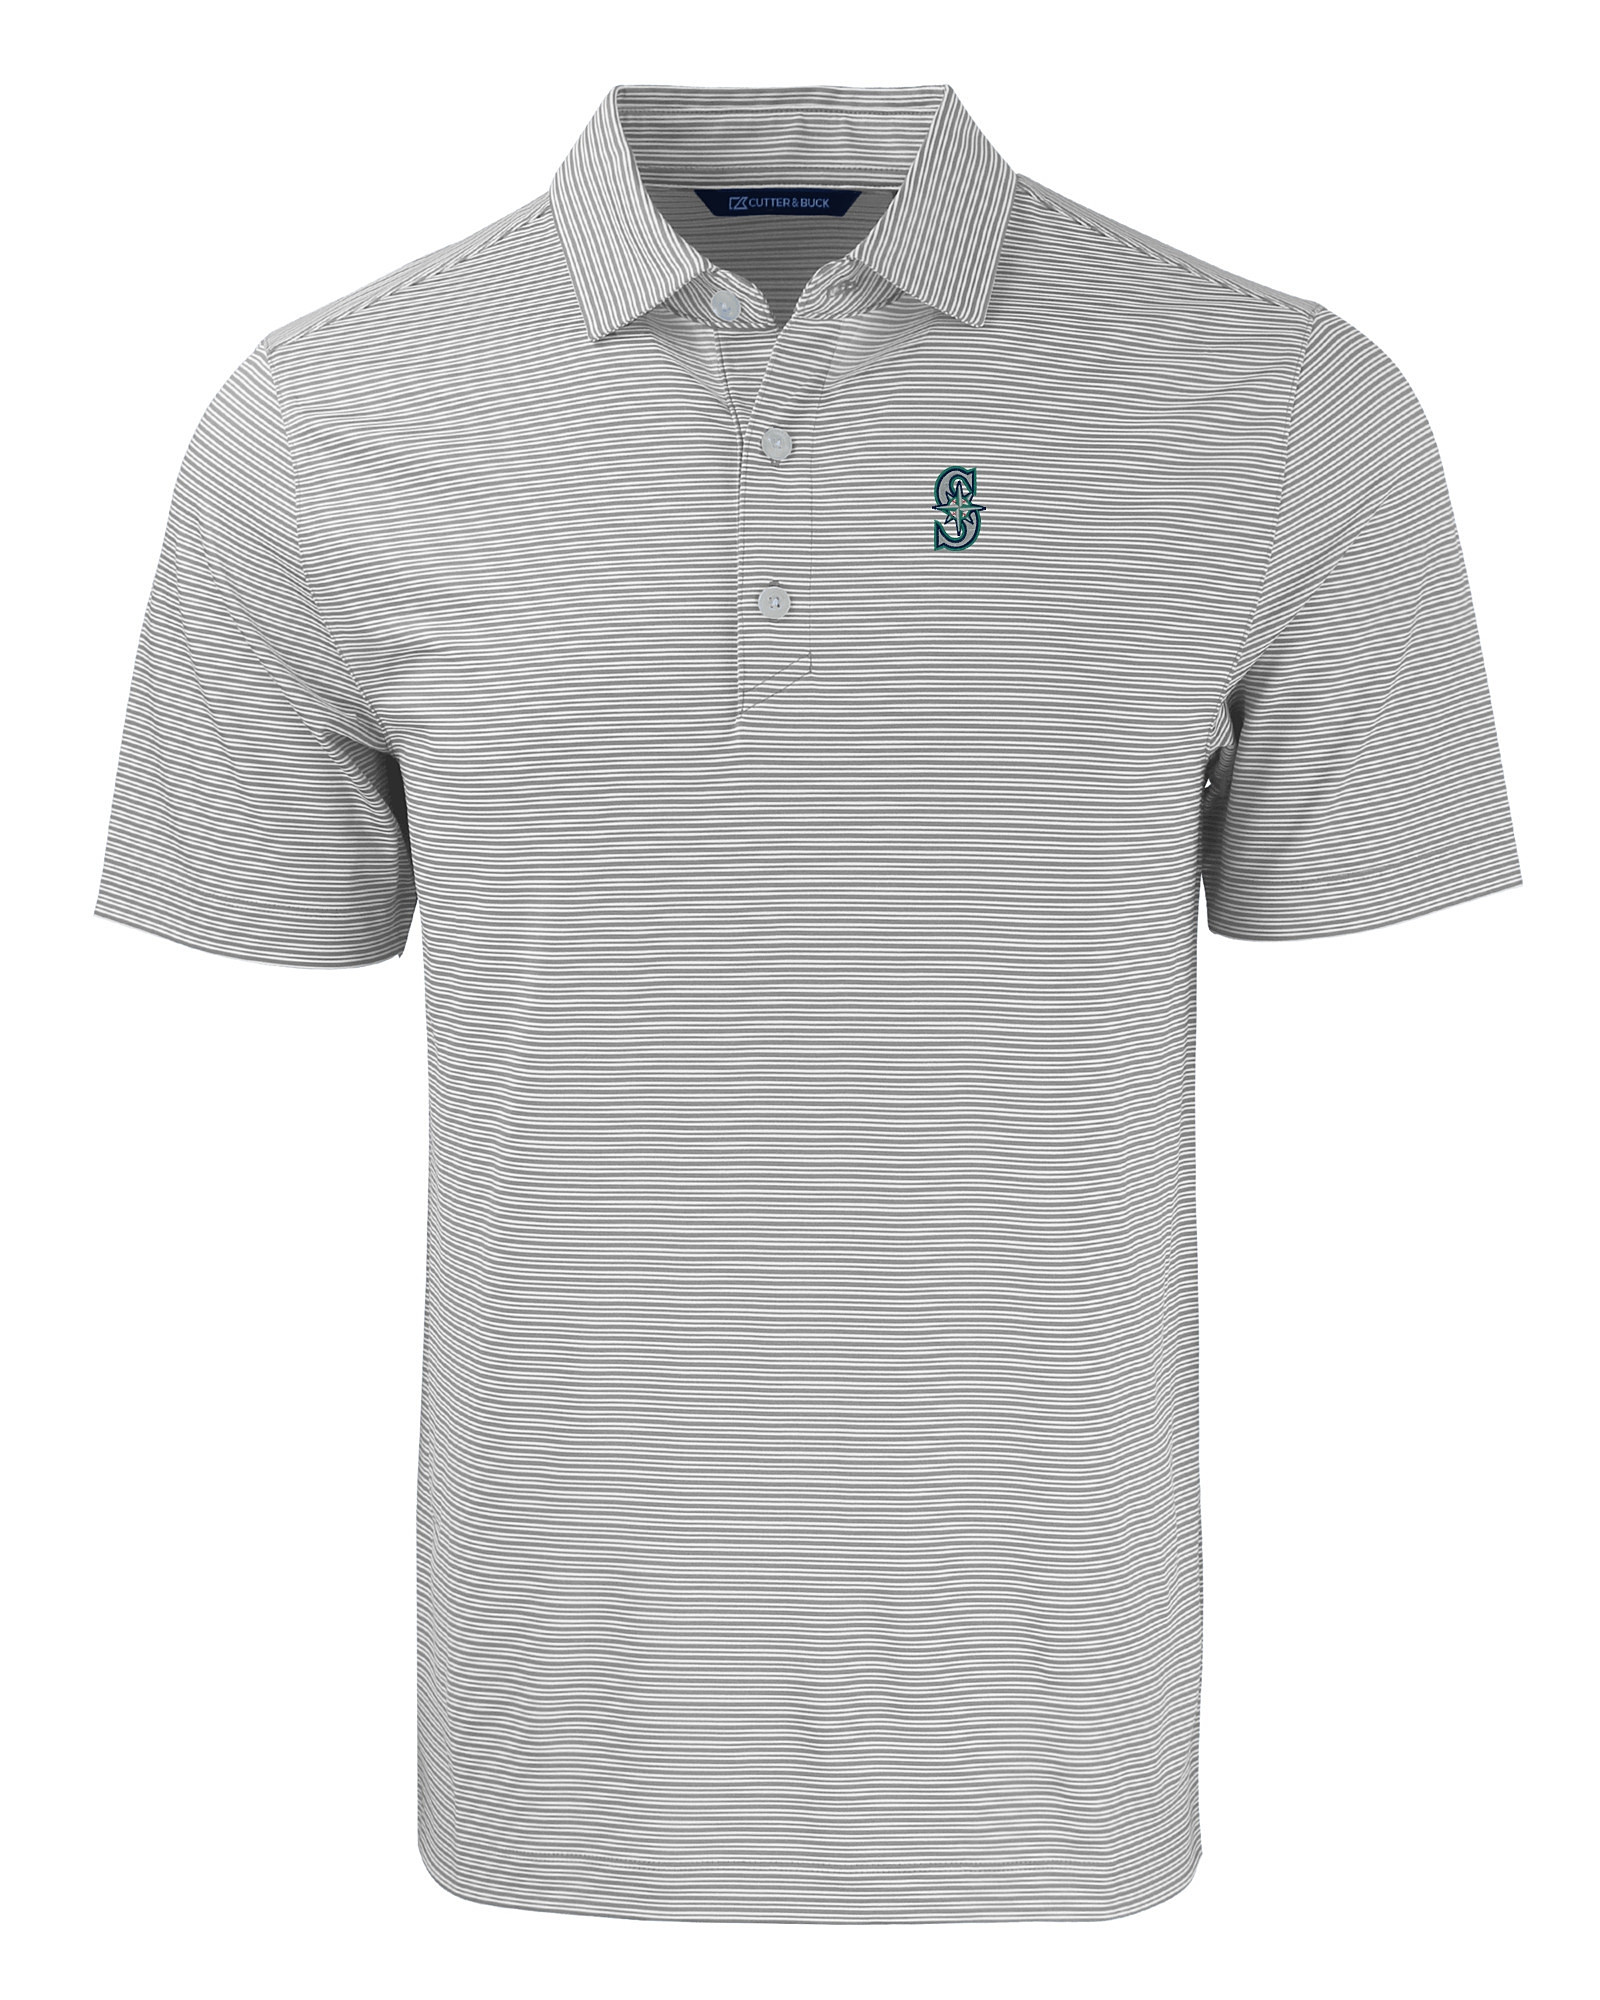 Seattle Mariners Cutter & Buck Forge Eco Double Stripe Stretch